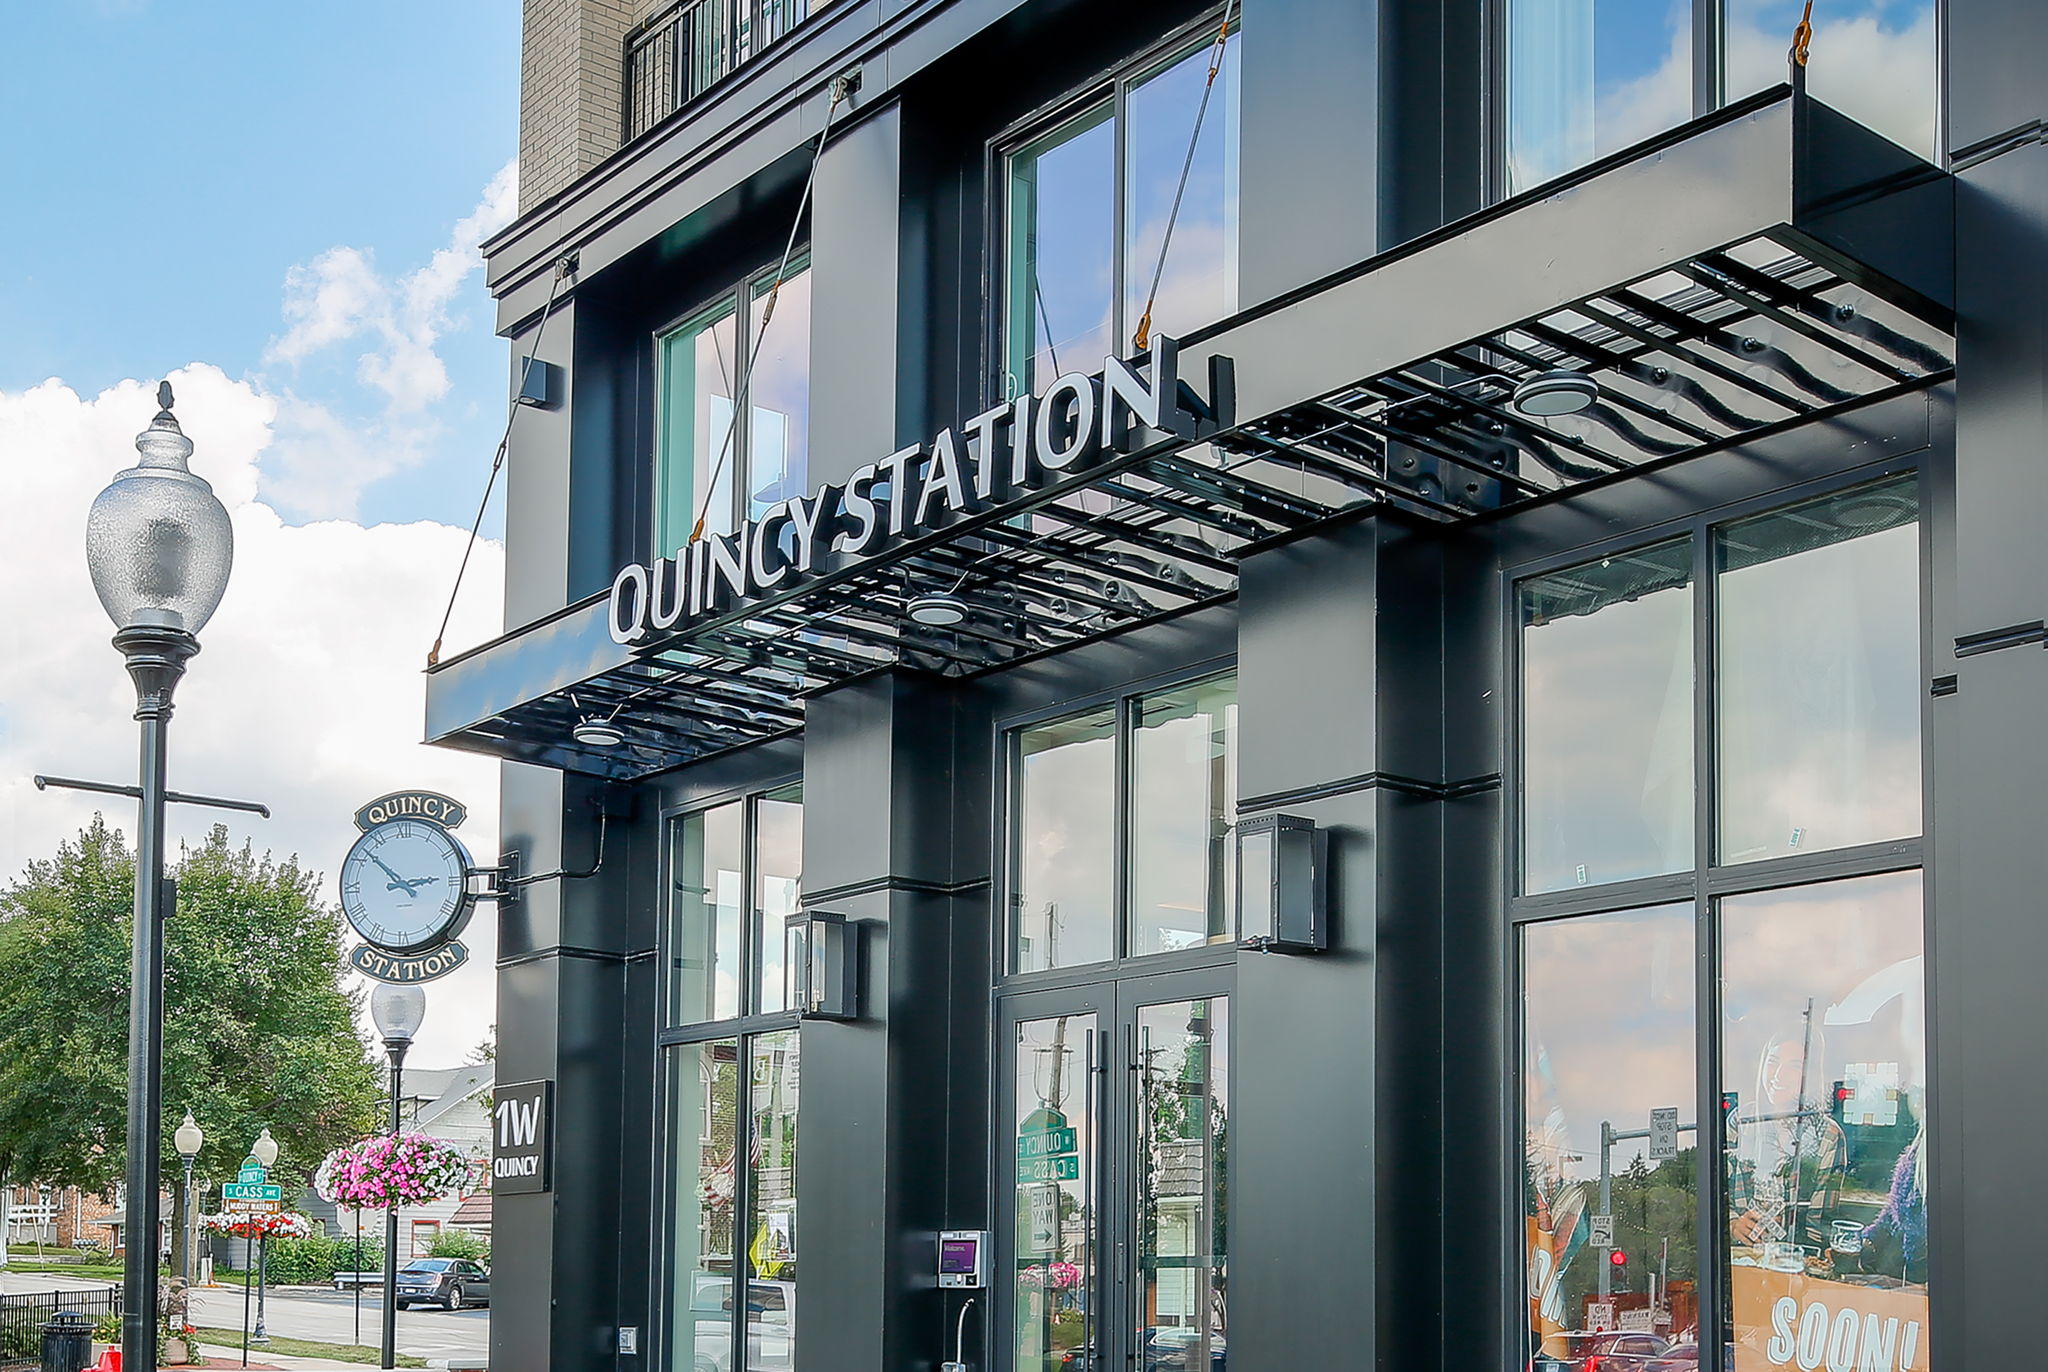 Quincy Station Front Sign & Clock